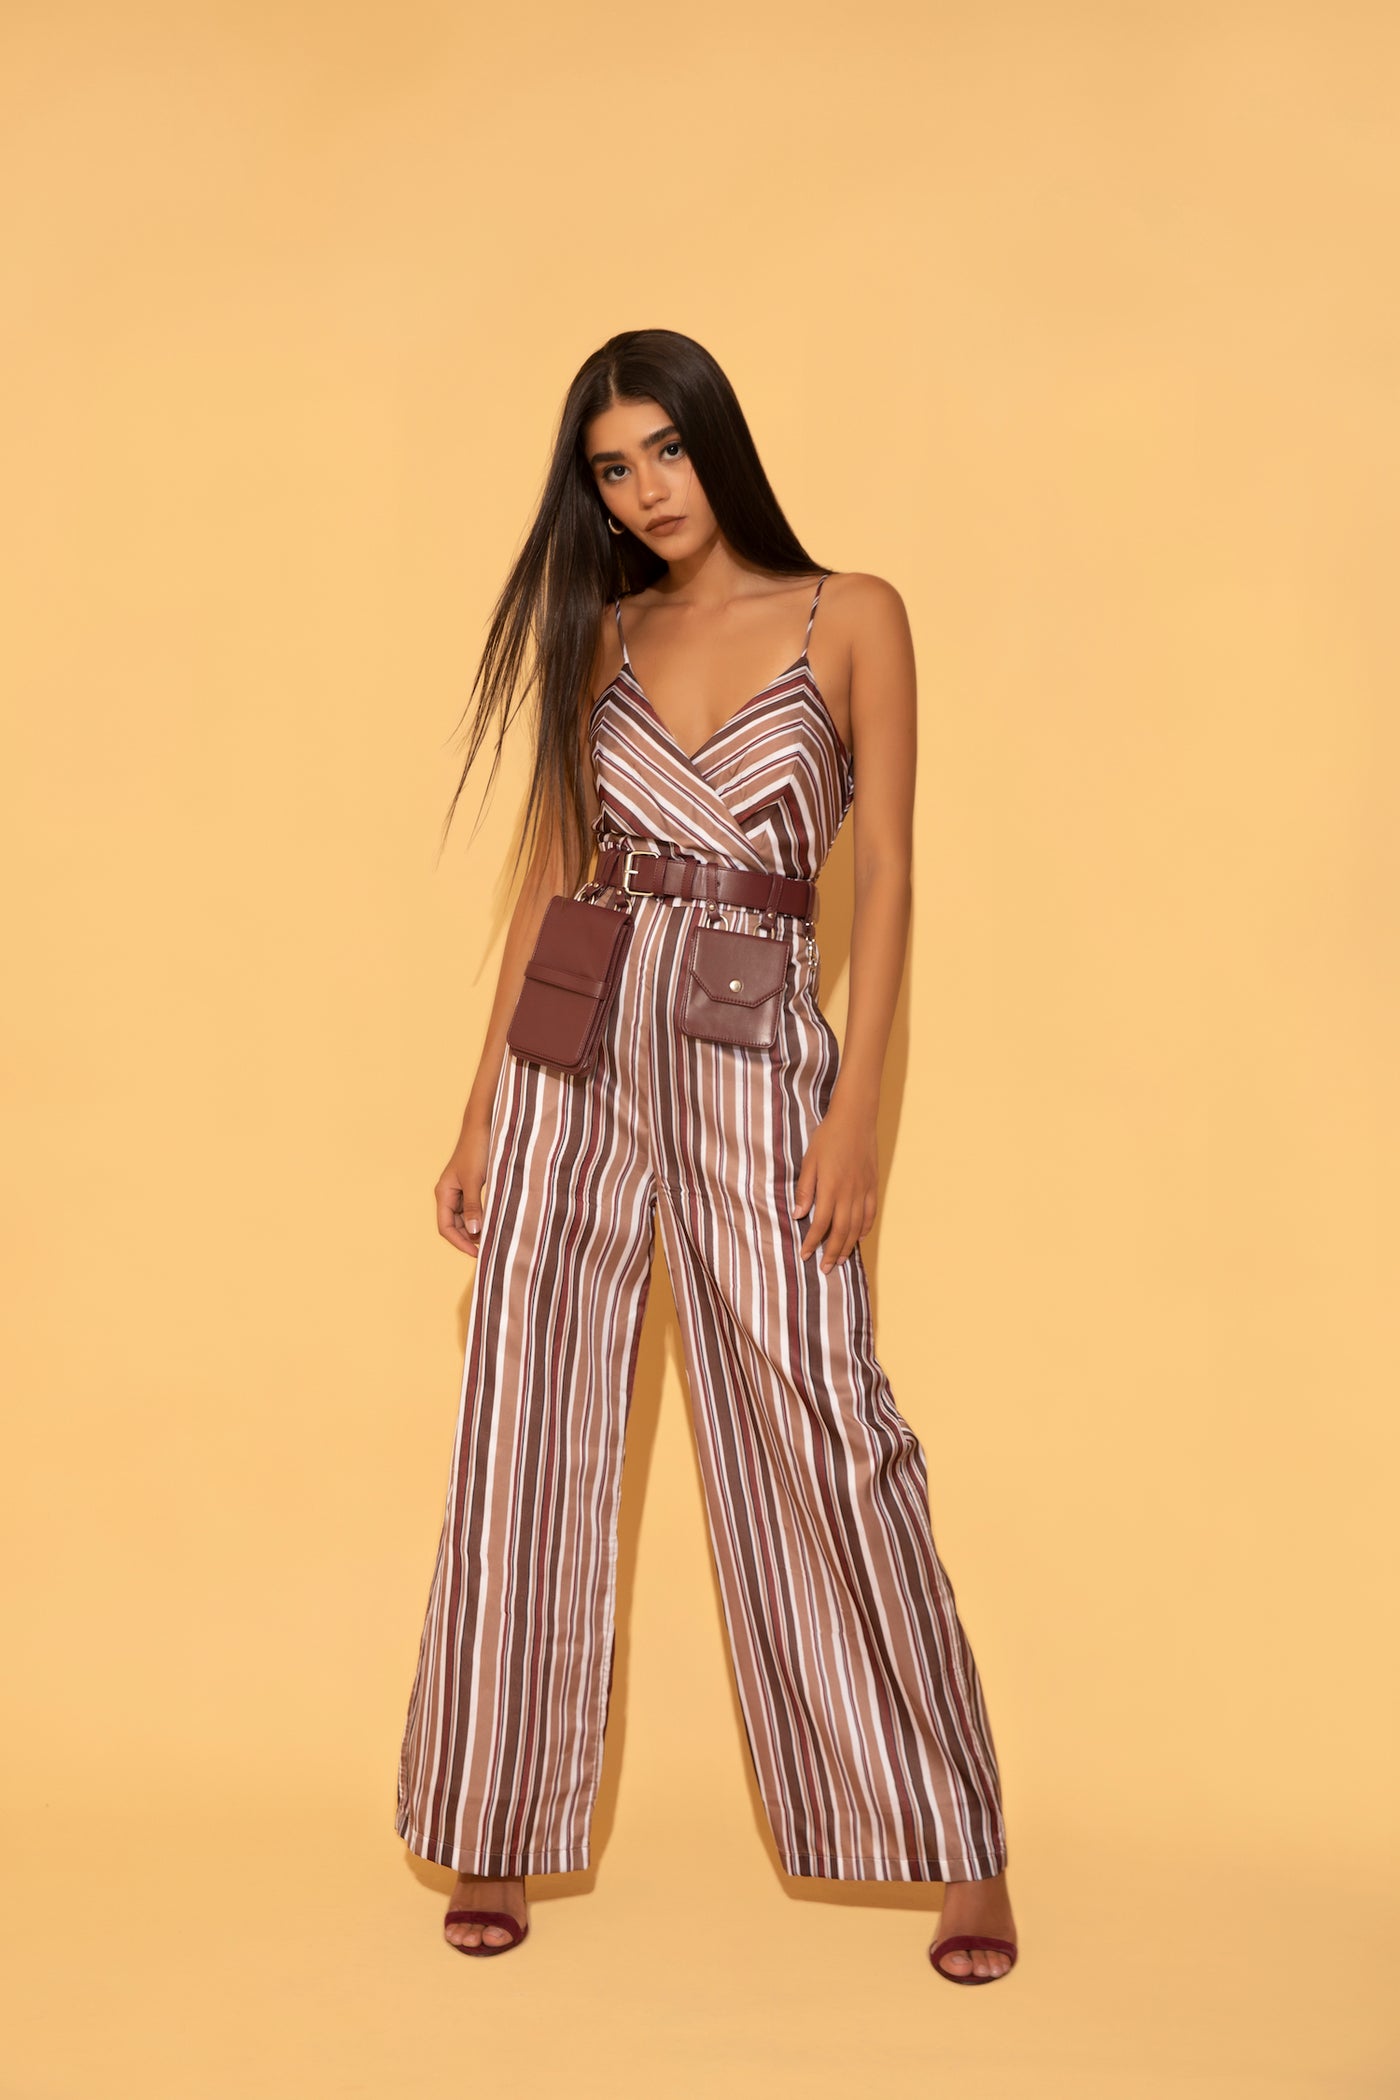 Stripe jumpsuit paired with wine coloured utility bag belt from Torqadorn